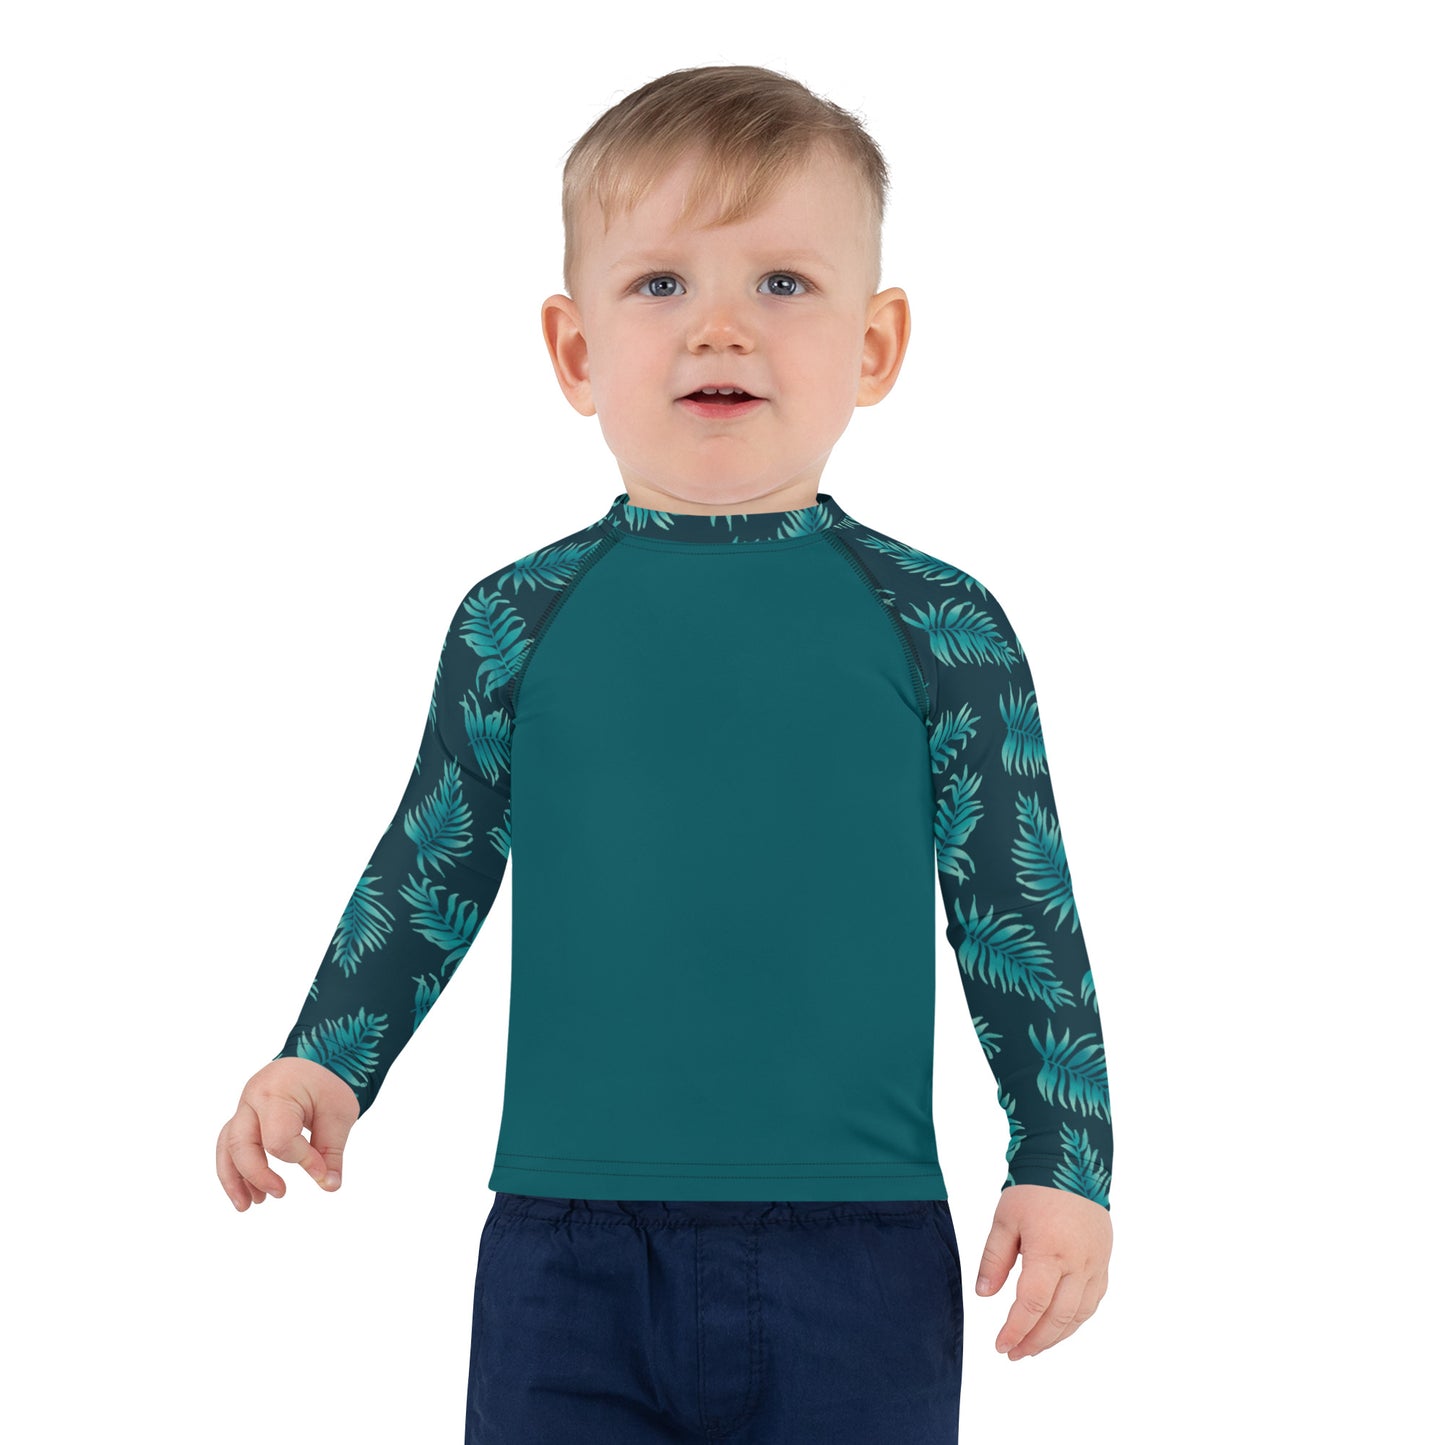 Kids Rash Guard 2T - 7 years - Palm Leaves in Blue Ombre Sleeve